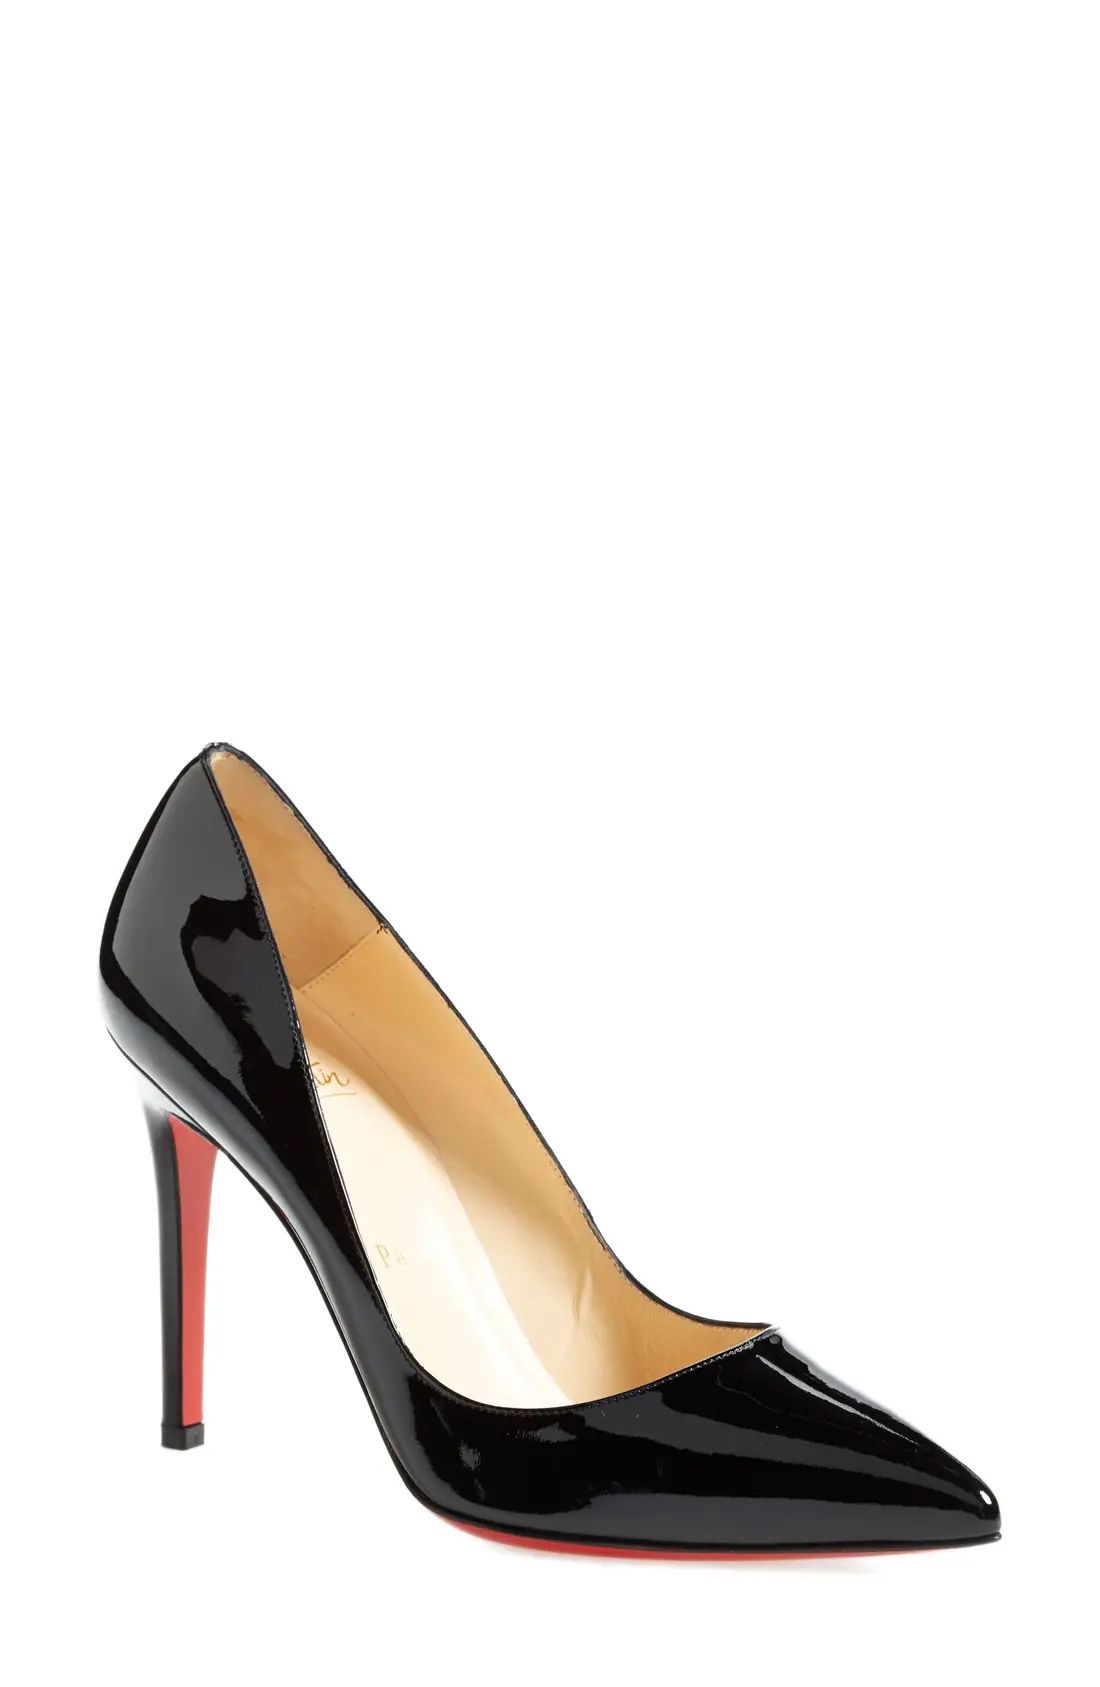 Women's Christian Louboutin 'Pigalle' Pointy Toe Pump, Size 5US / 35EU - Black | Nordstrom